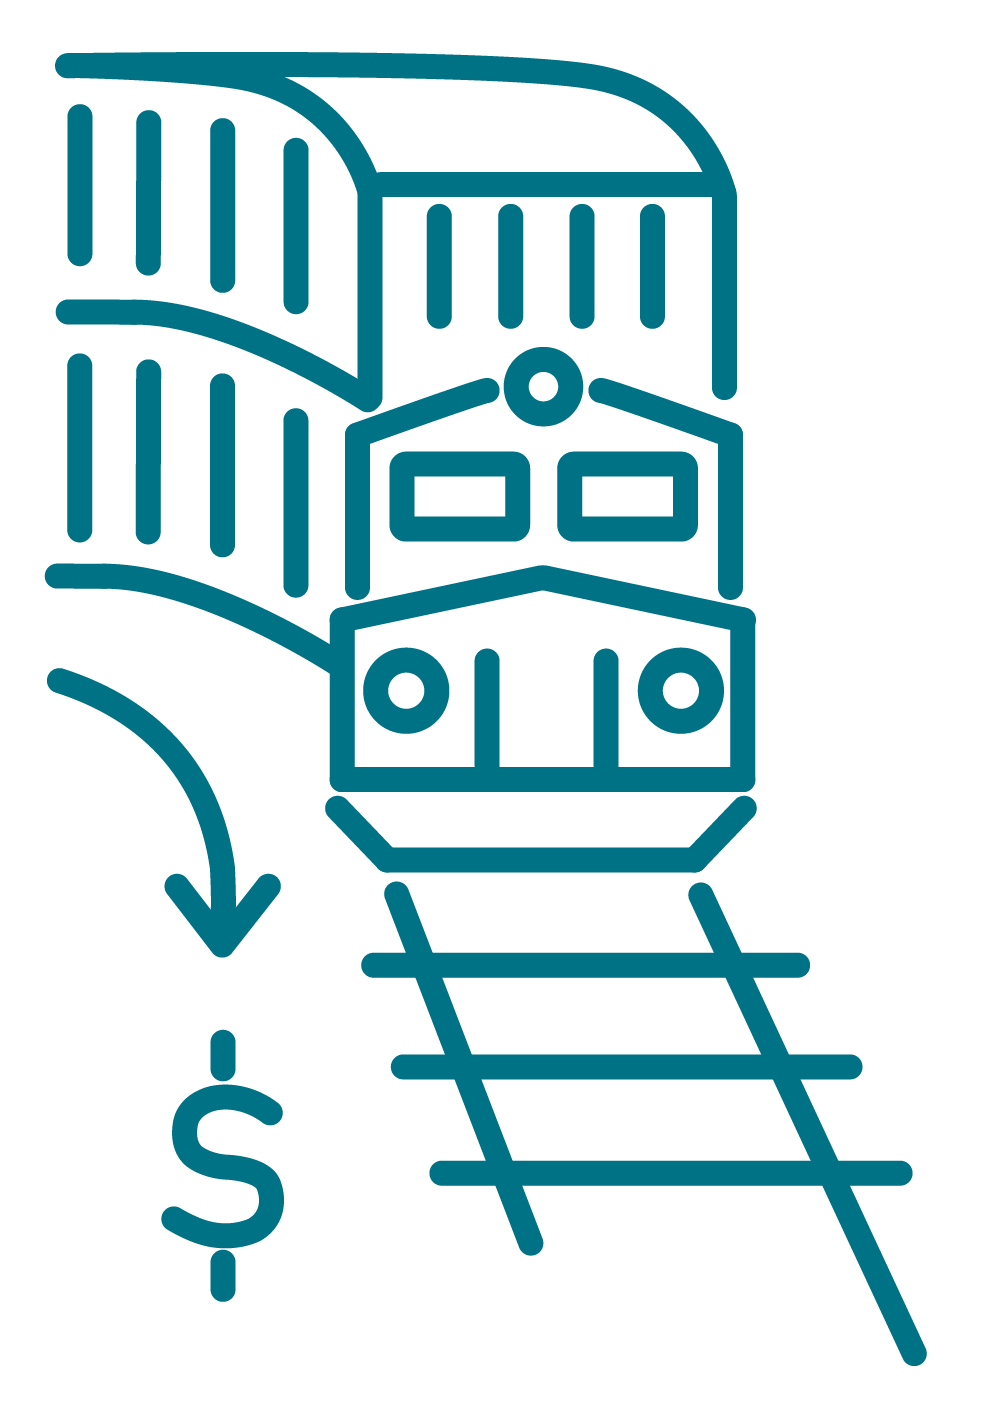 Icon depicting reduced freight costs